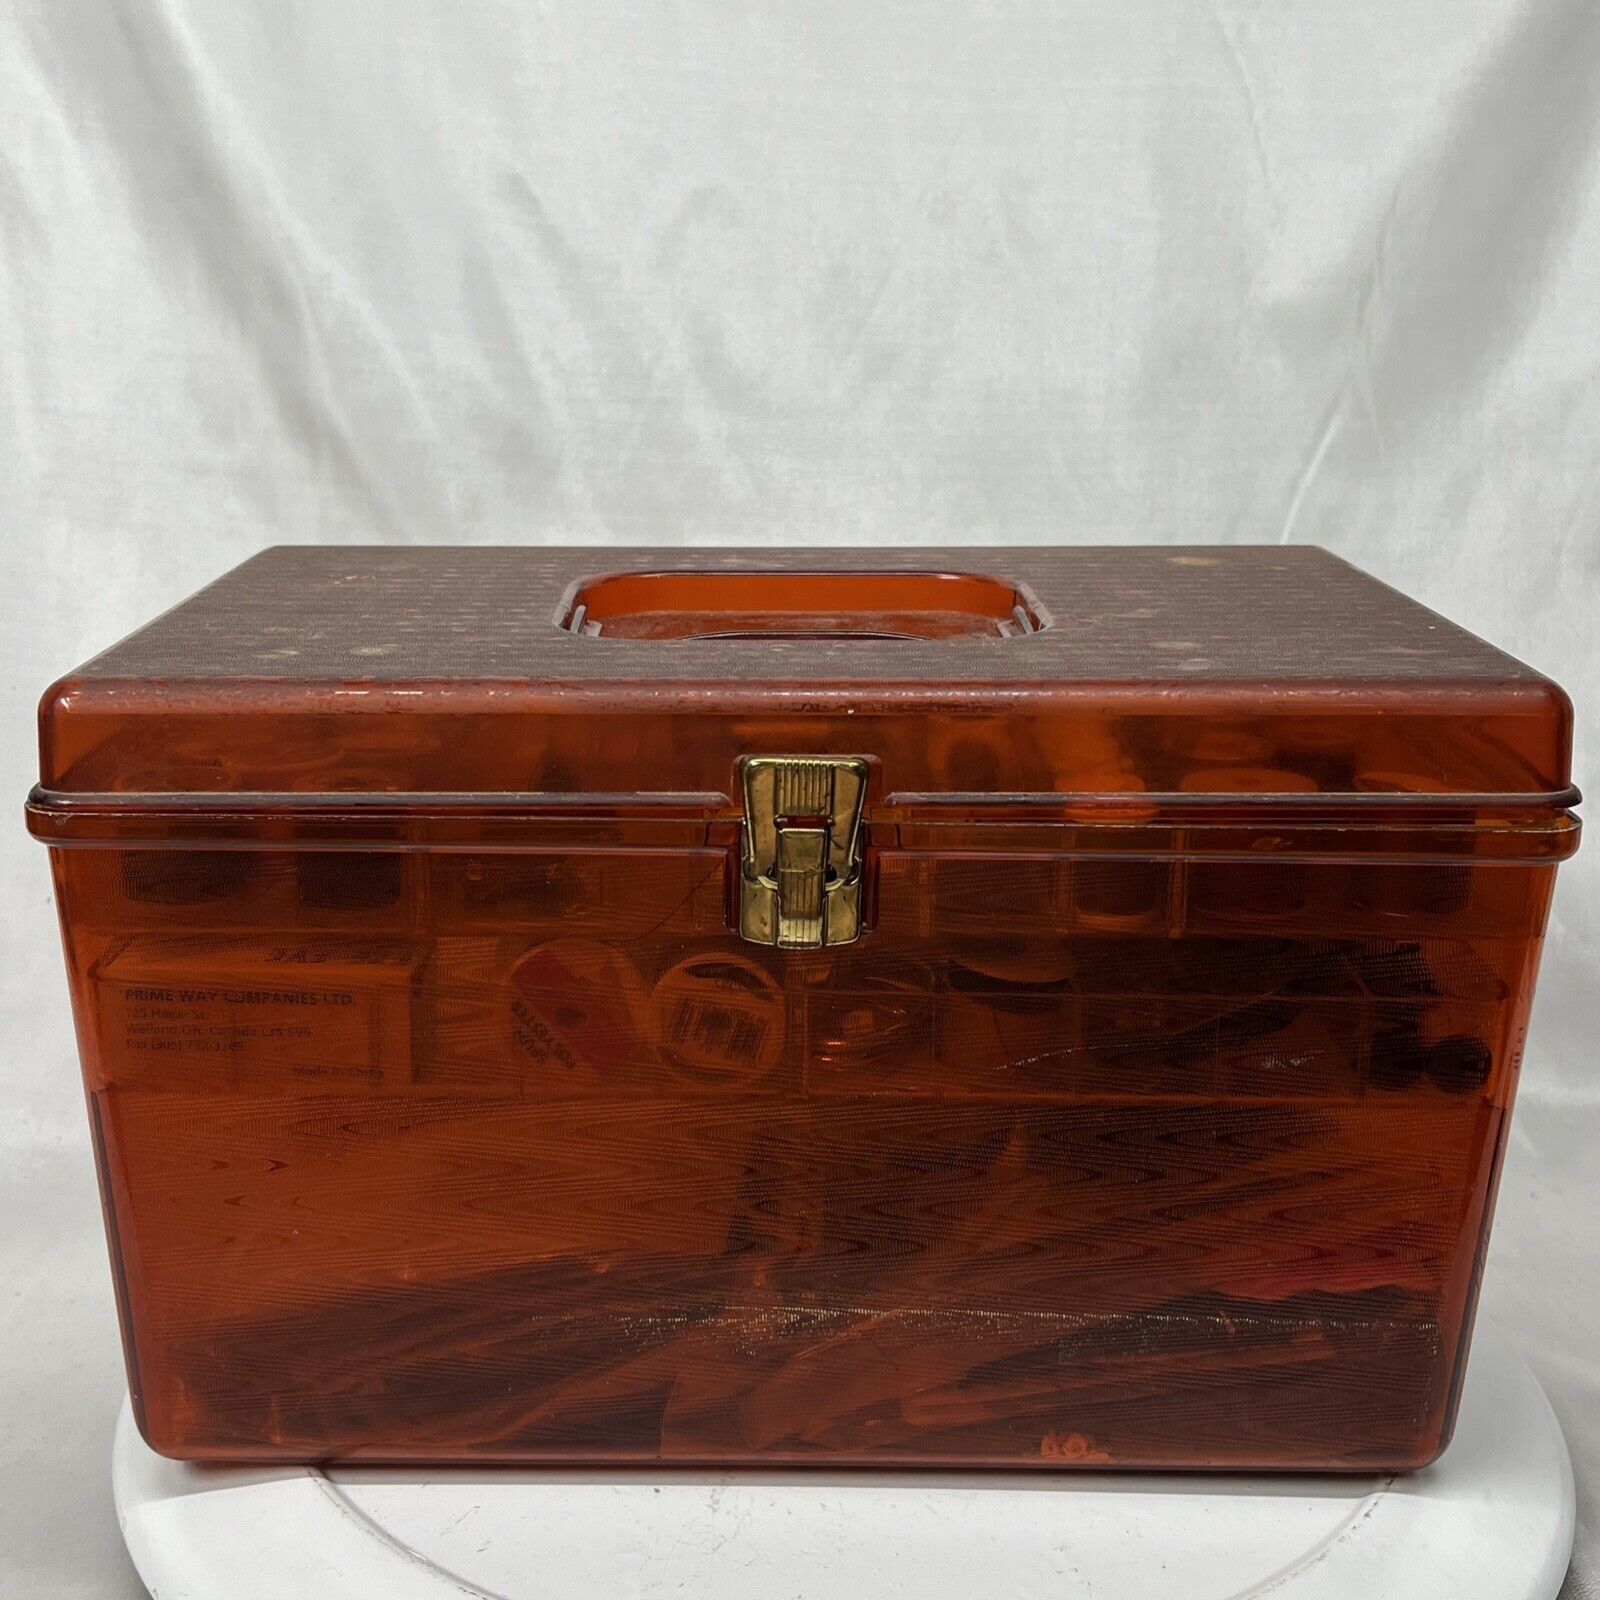 Filled full VTG WIL-HOLD Wilson Plastic Amber Orange Sewing Box/2 Tray Sewing